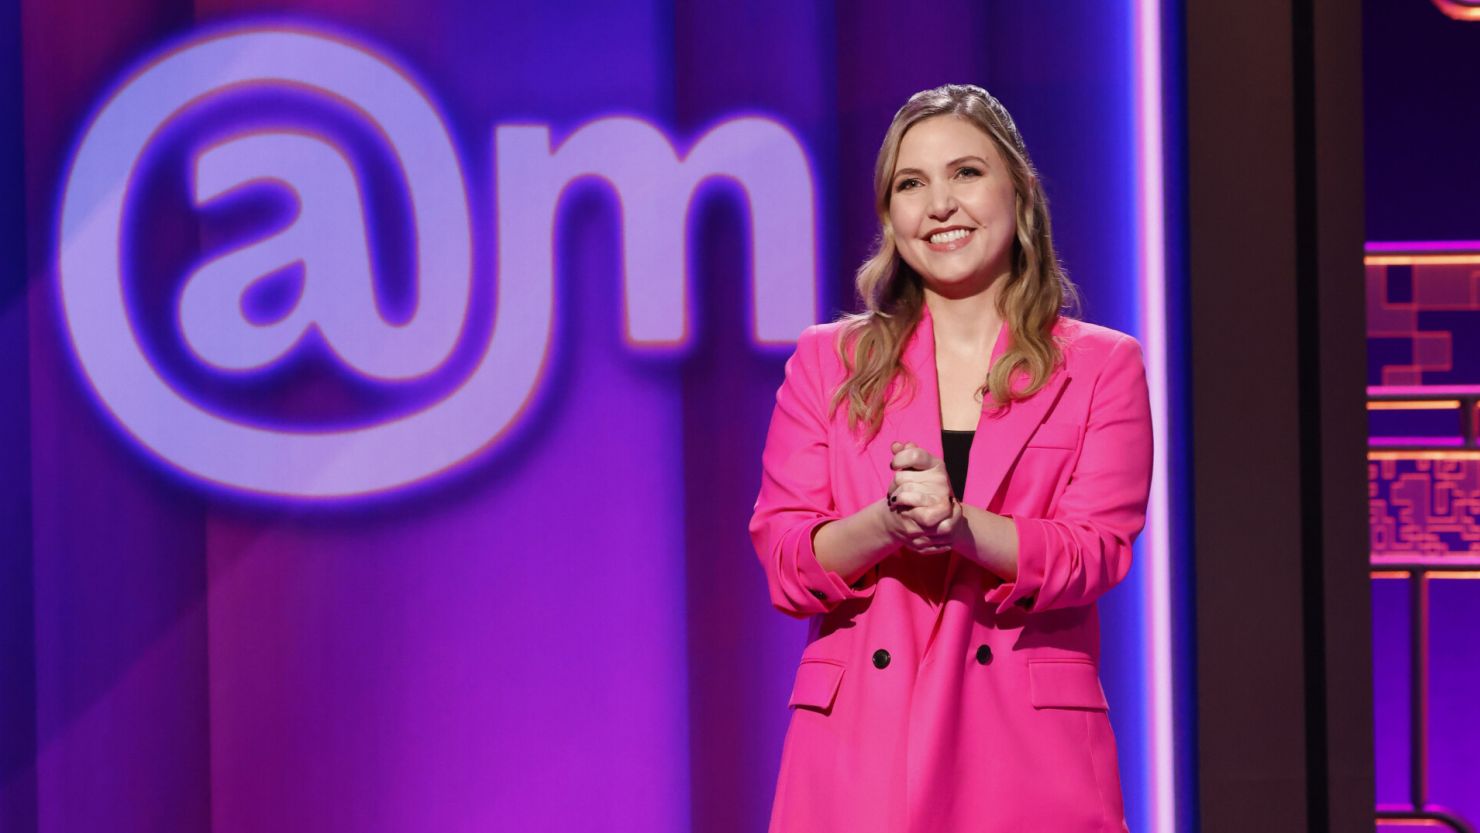 Stand-up comedian Taylor Tomlinson is the host of "After Midnight," a new CBS late night show.